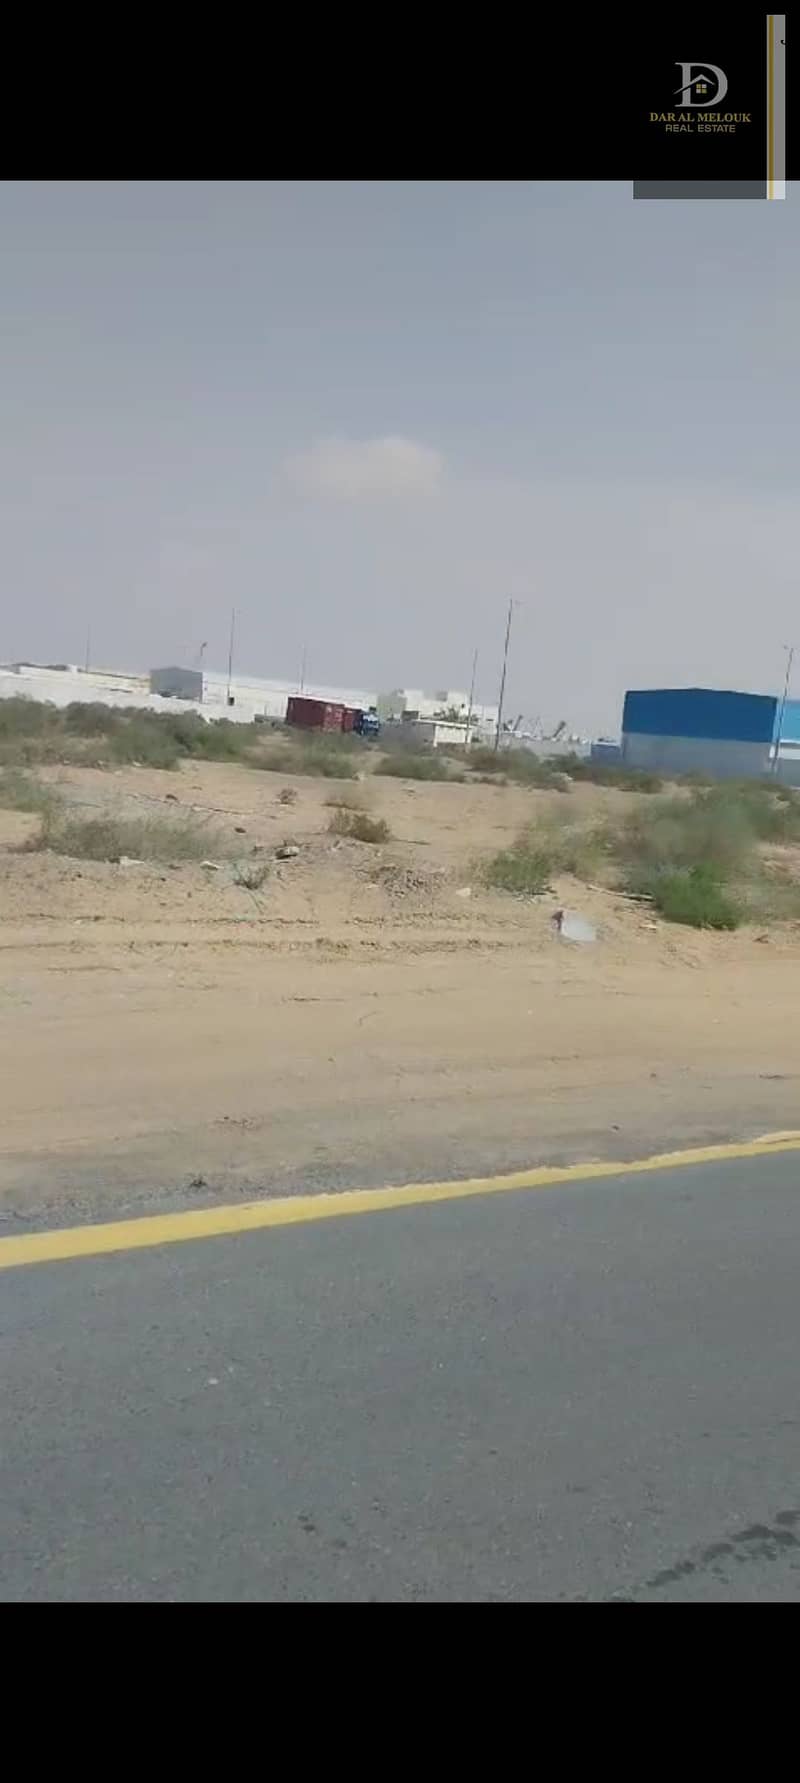 For sale in Sharjah    Al-Raqiba area    Residential investment plot of land